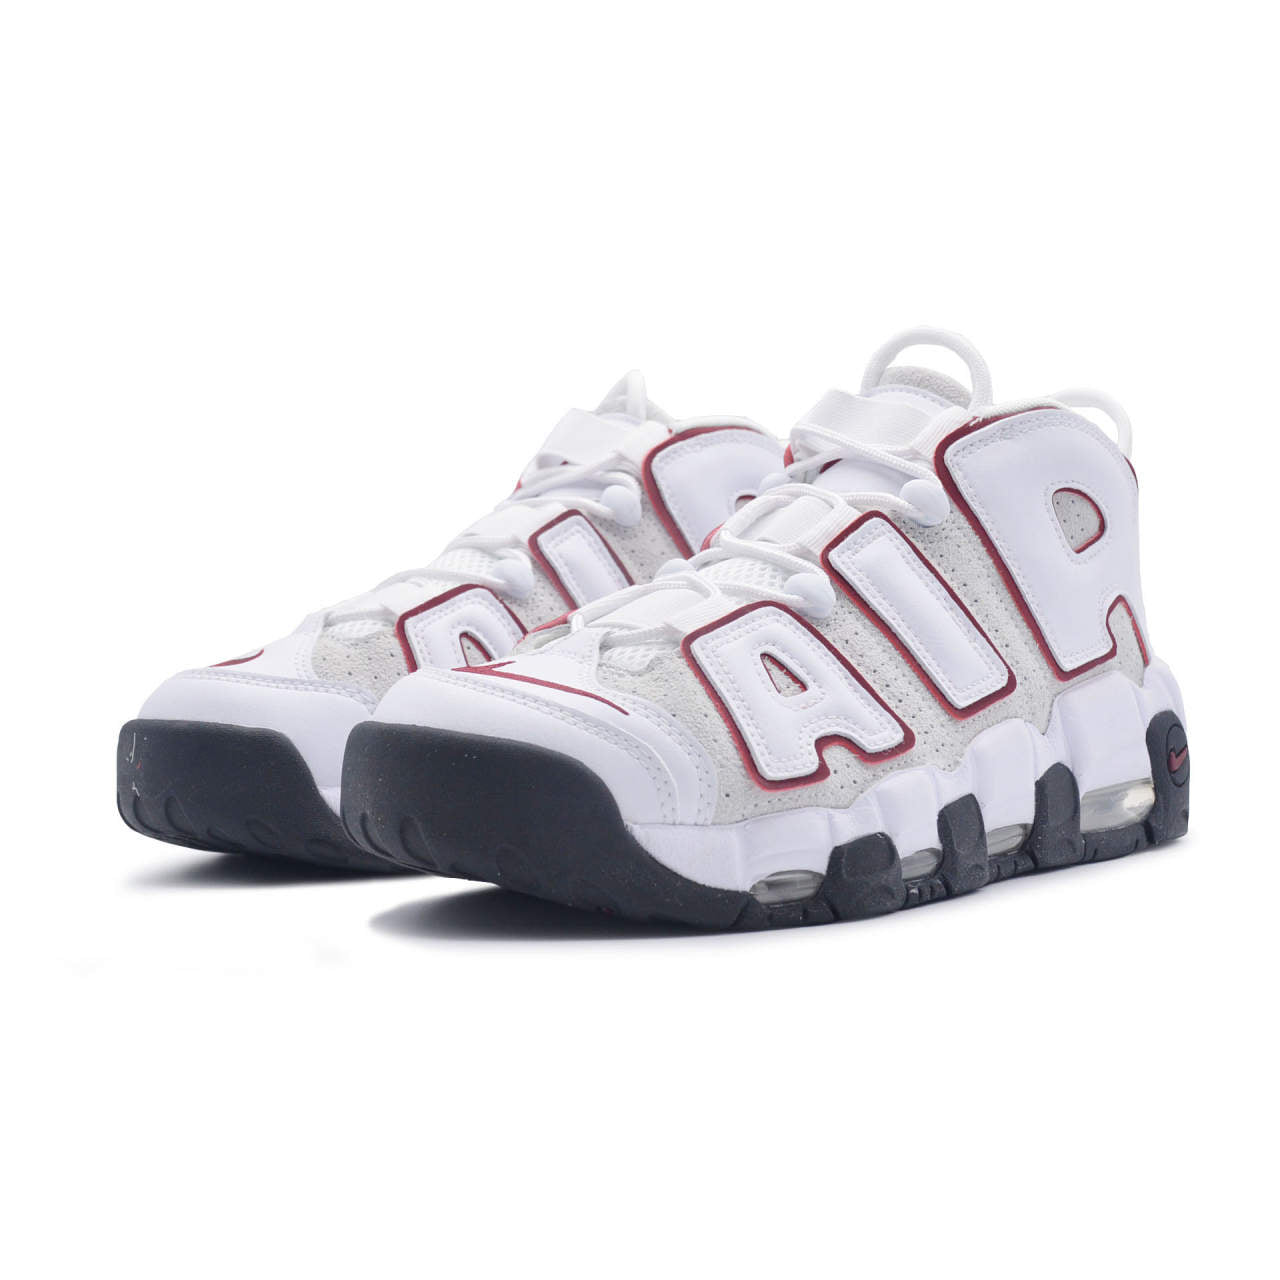 Nike Air More Uptempo 96 White Team Red